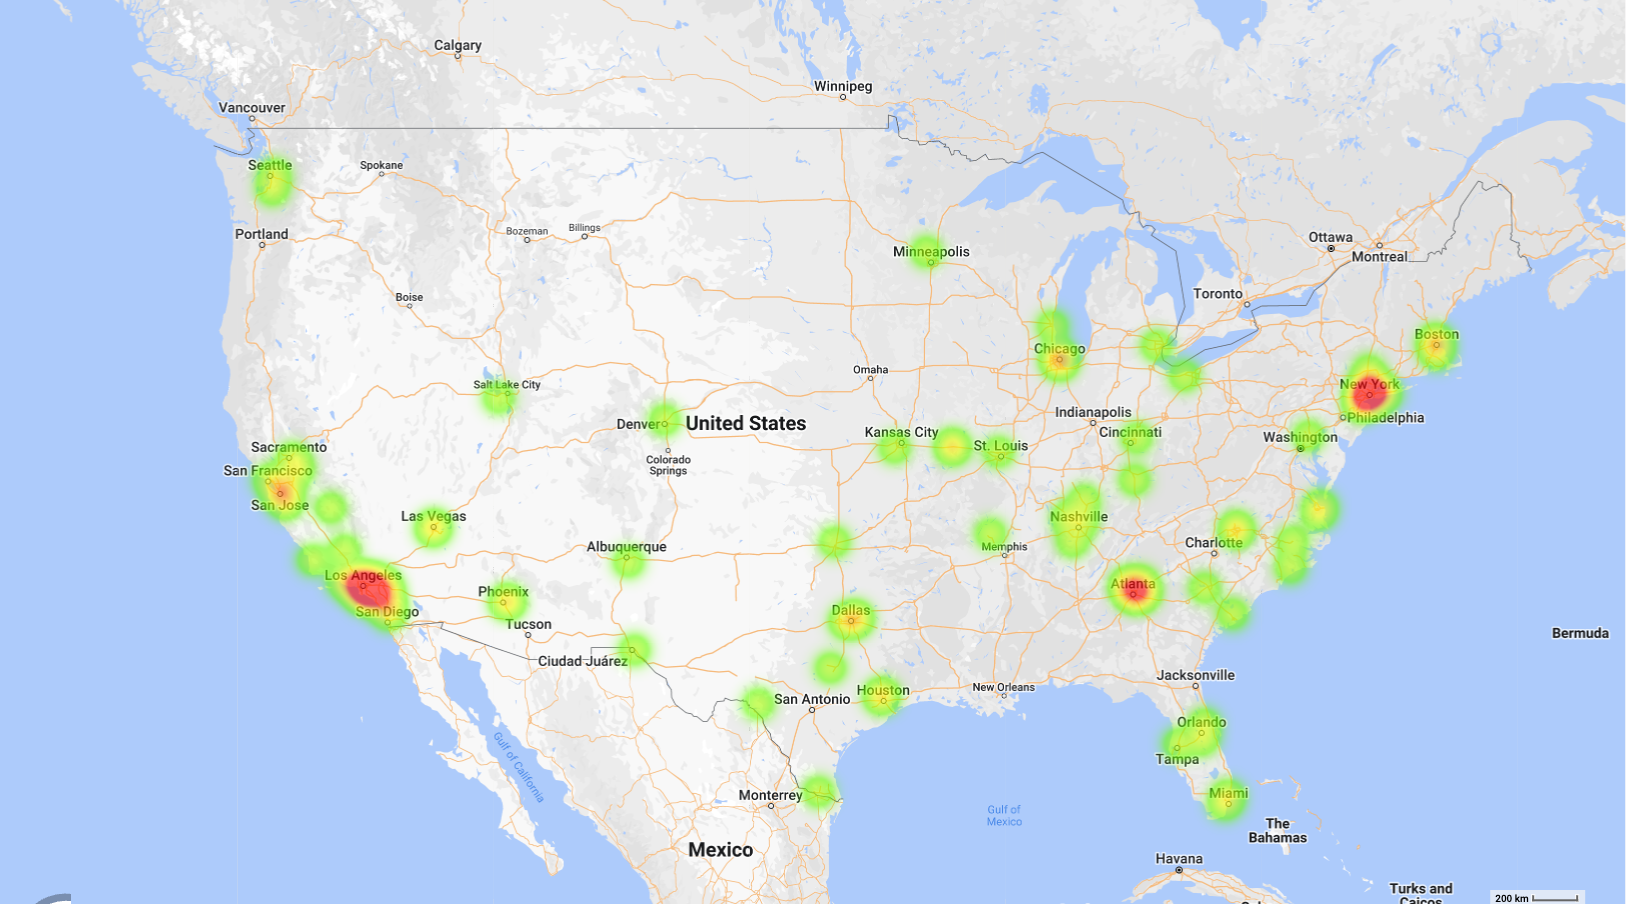 Crime heat map from US zip codes created by Mapize.